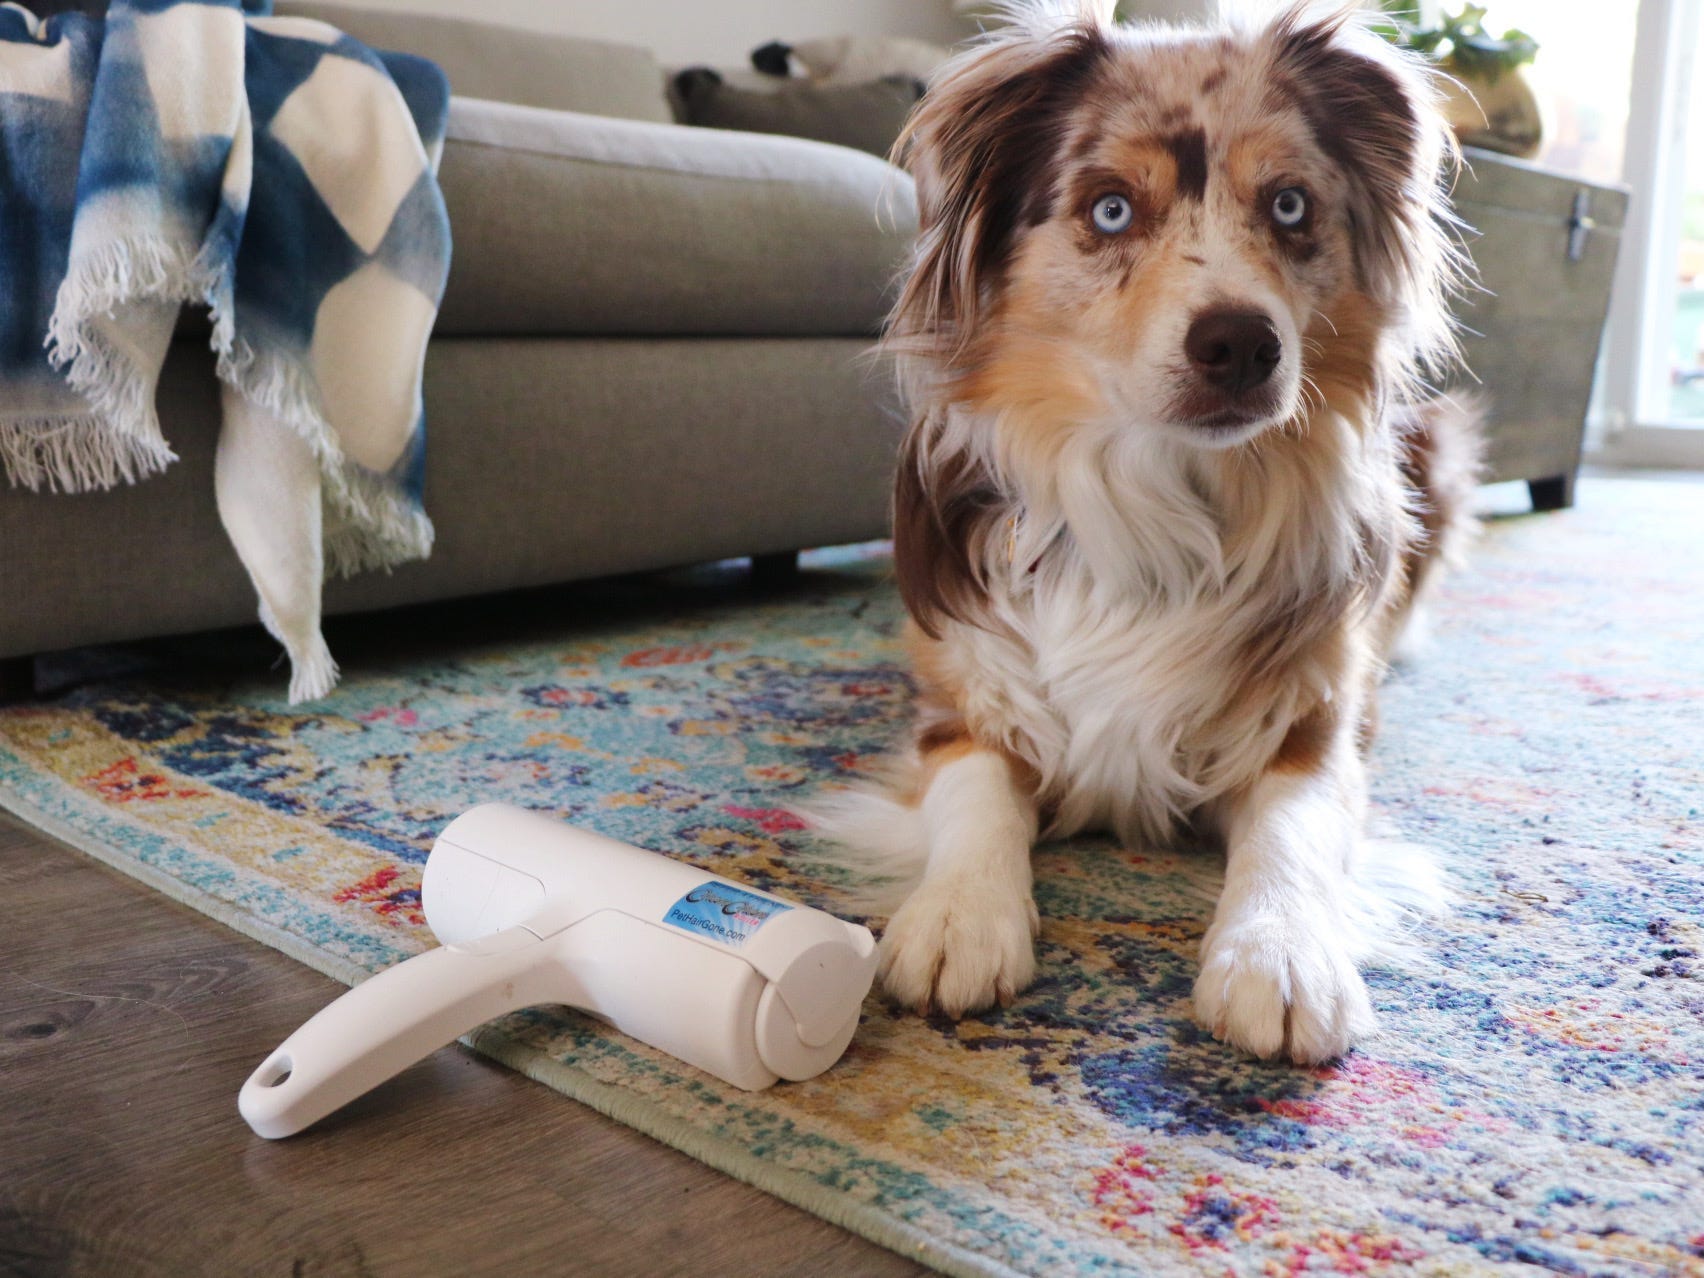 A miniature Australian shepherd dog sits next to a ChomChom Roller and both are on a patterned rug near a couch.